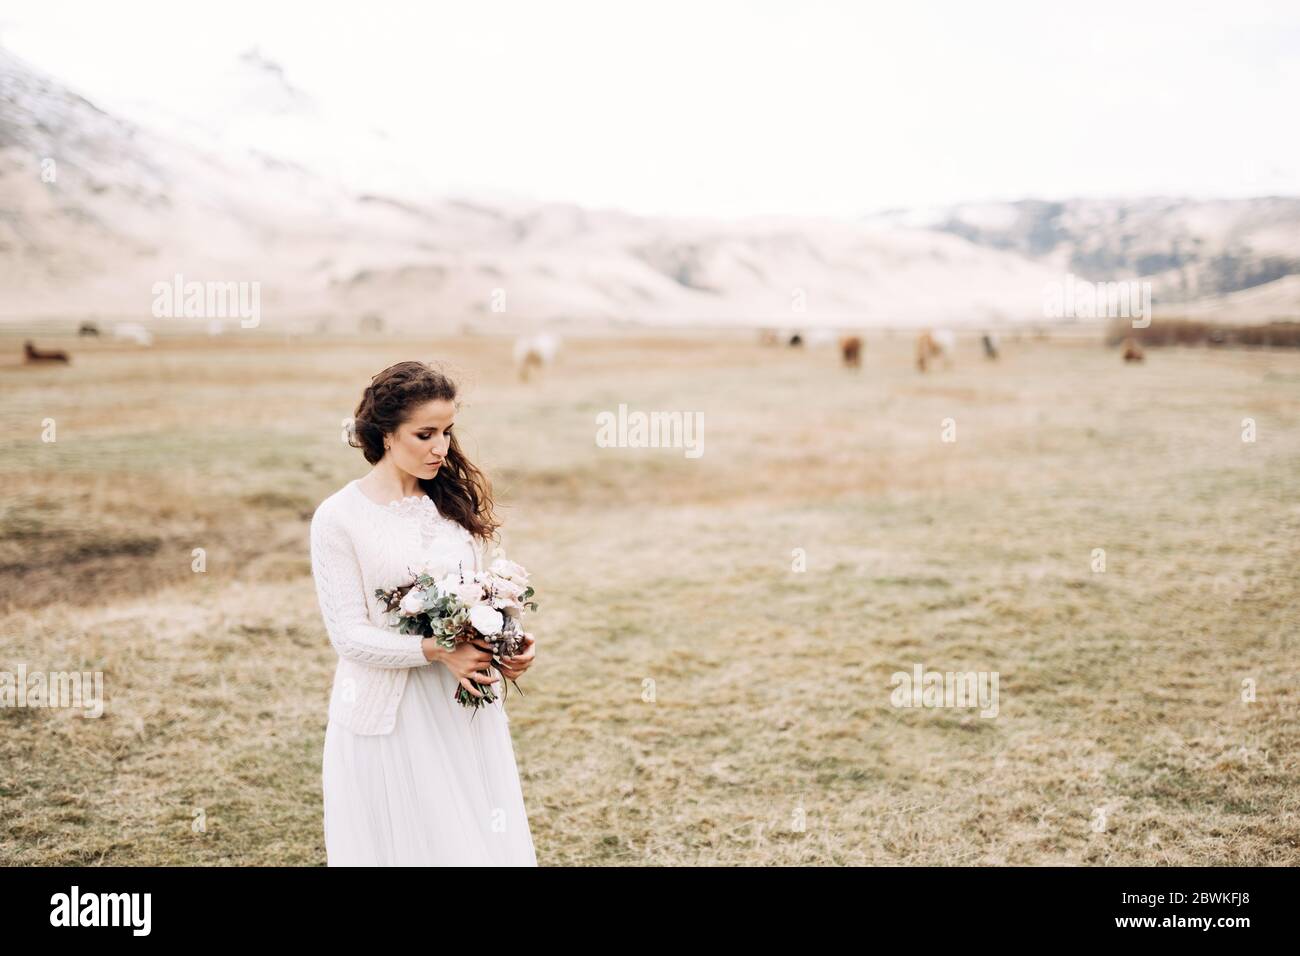 Portrait of a bride in a white wedding dress, with a bride's bouquet in her hands. In a field of dry yellow grass, amid a snowy mountain and grazing Stock Photo